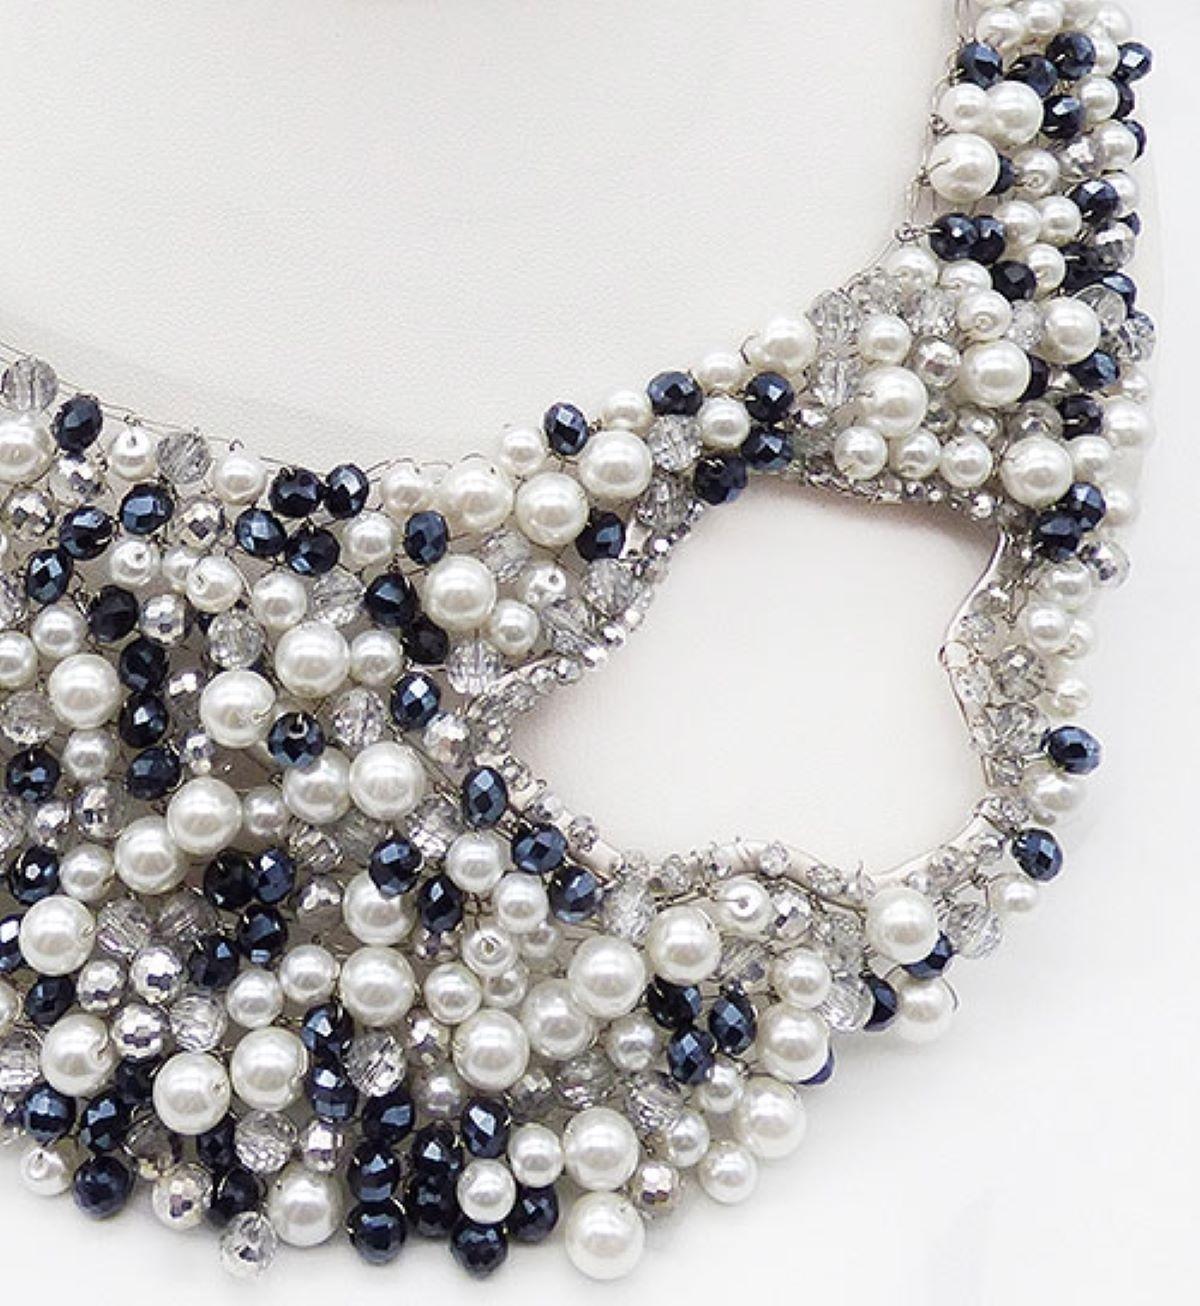 Fabulous Hand woven Pearl, Crystal and faceted Bead Statement Bib Necklace by Designer Joe Vilaiwan. A stunning design of small and large white pearls, clear faceted Crystal beads with silver coating and black faceted Crystal beads all woven in